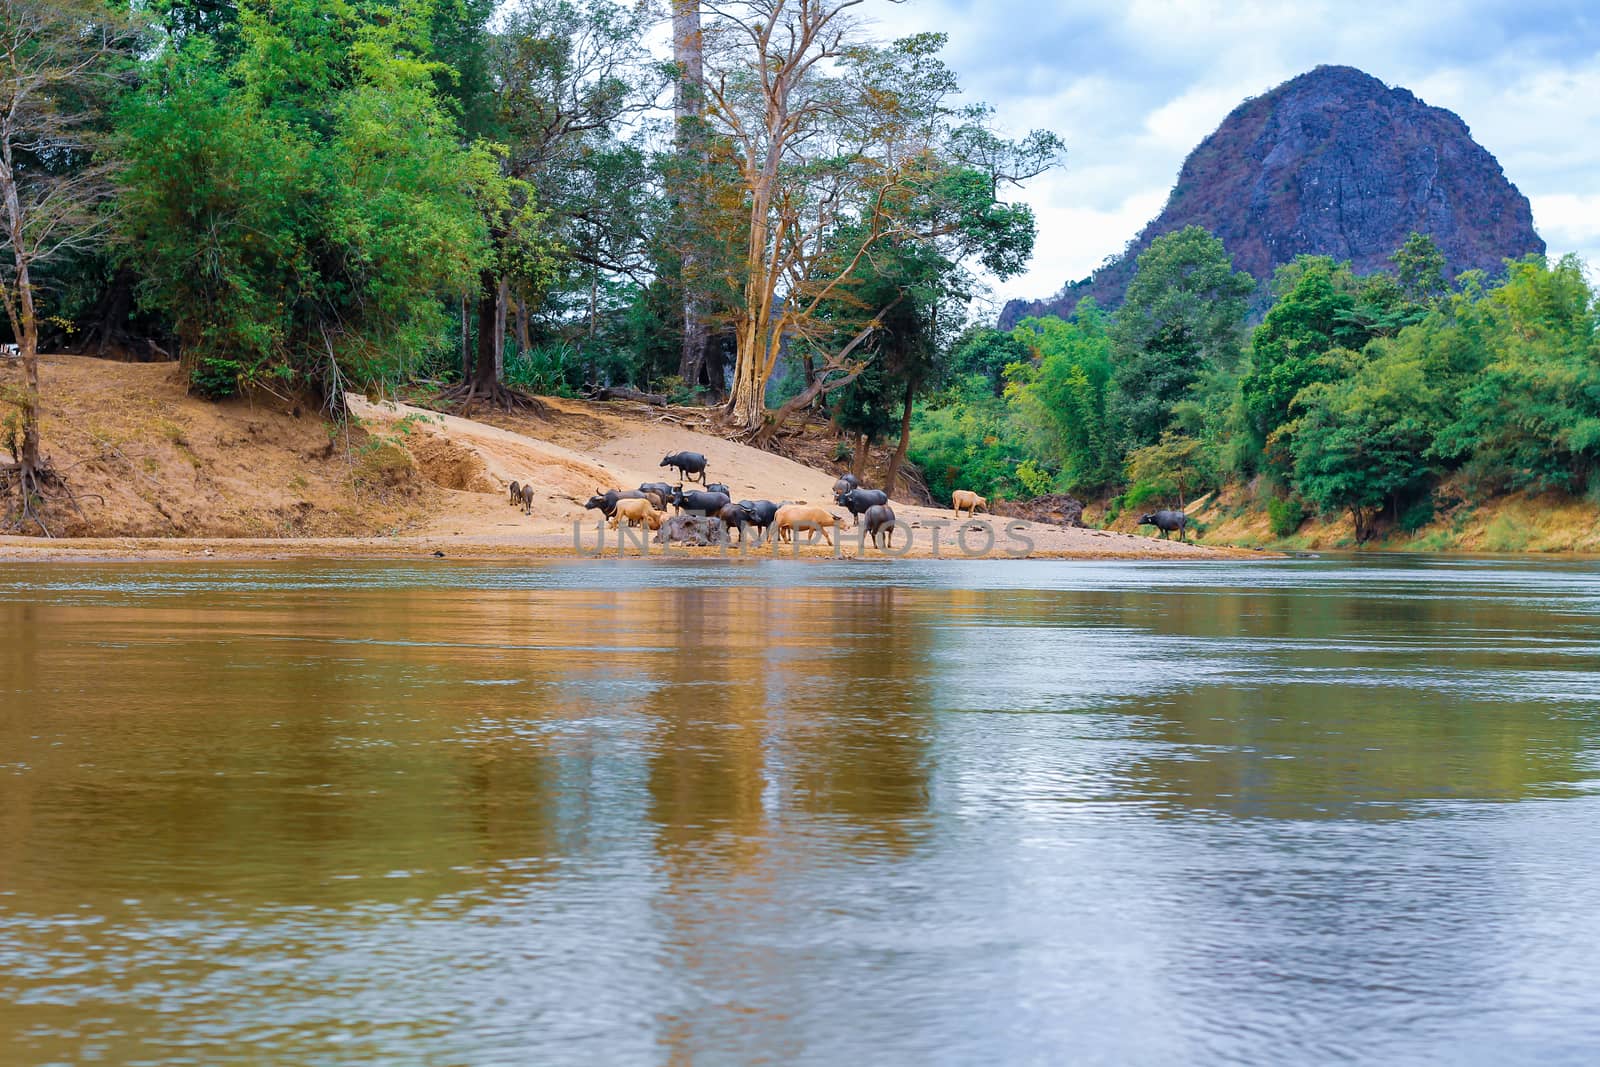 The buffalo is walking through the river In Laos. by suthipong